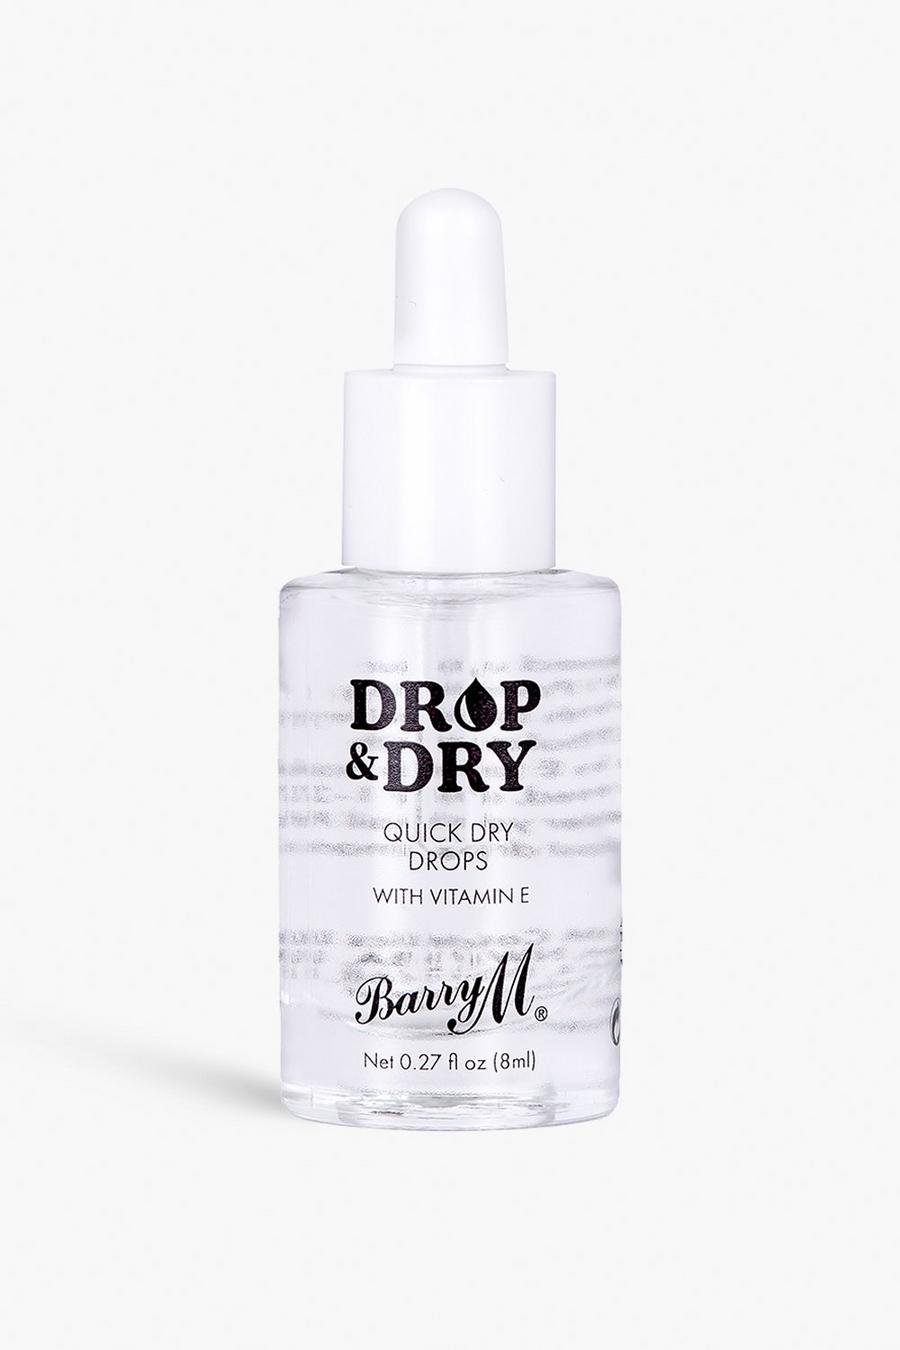 Clear clair Barry M Drop & Dry Quick Dry Drops